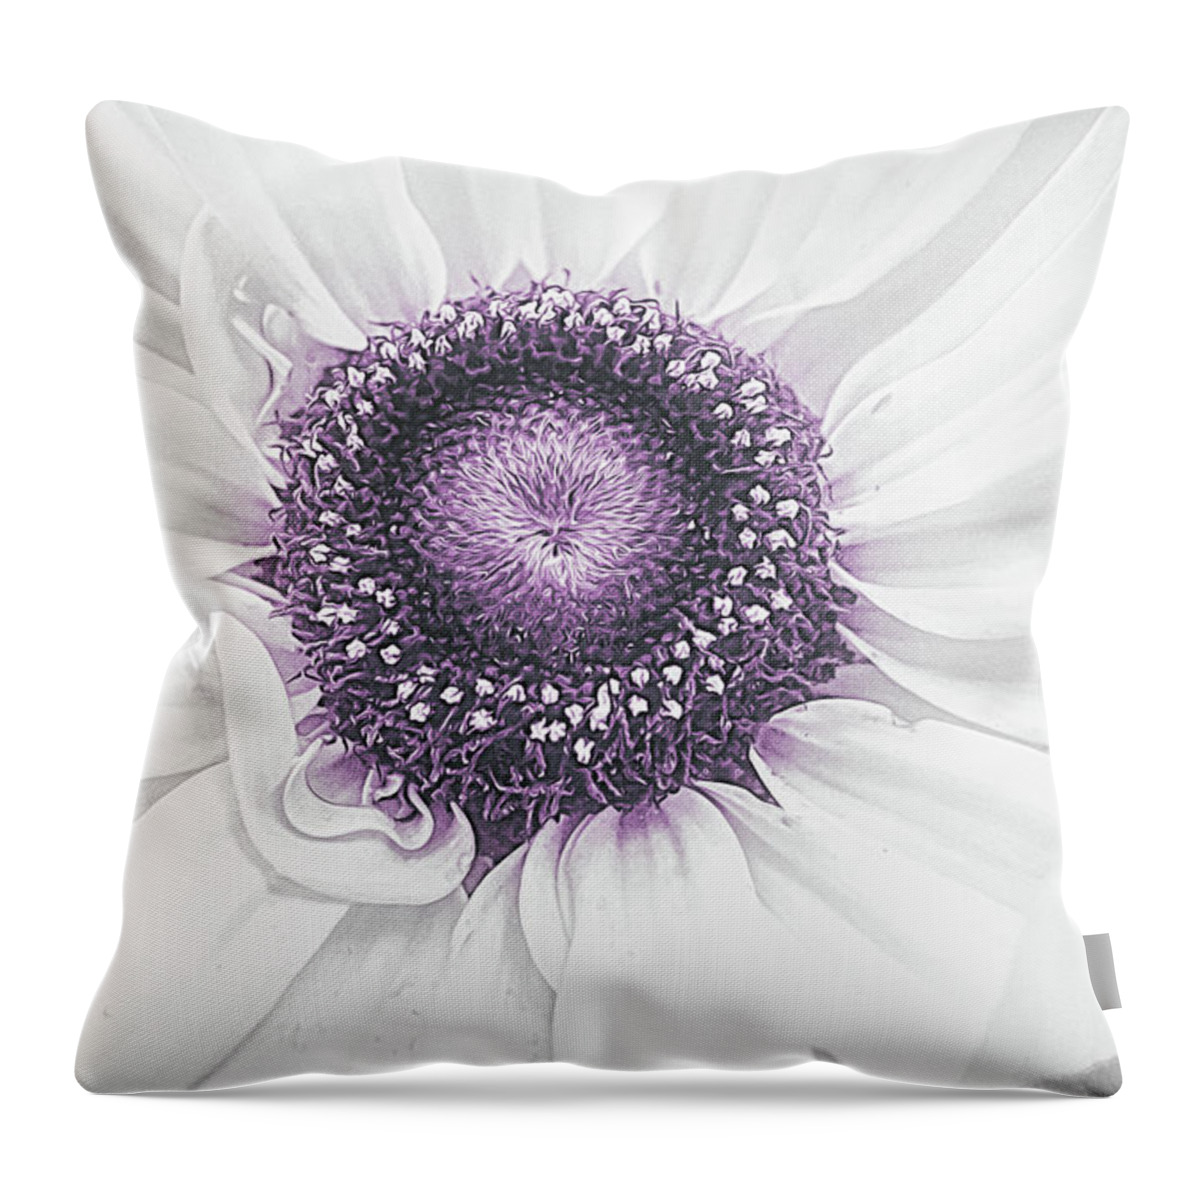 Flowers Throw Pillow featuring the photograph Who Says I Have To Be Yellow by Anita Pollak